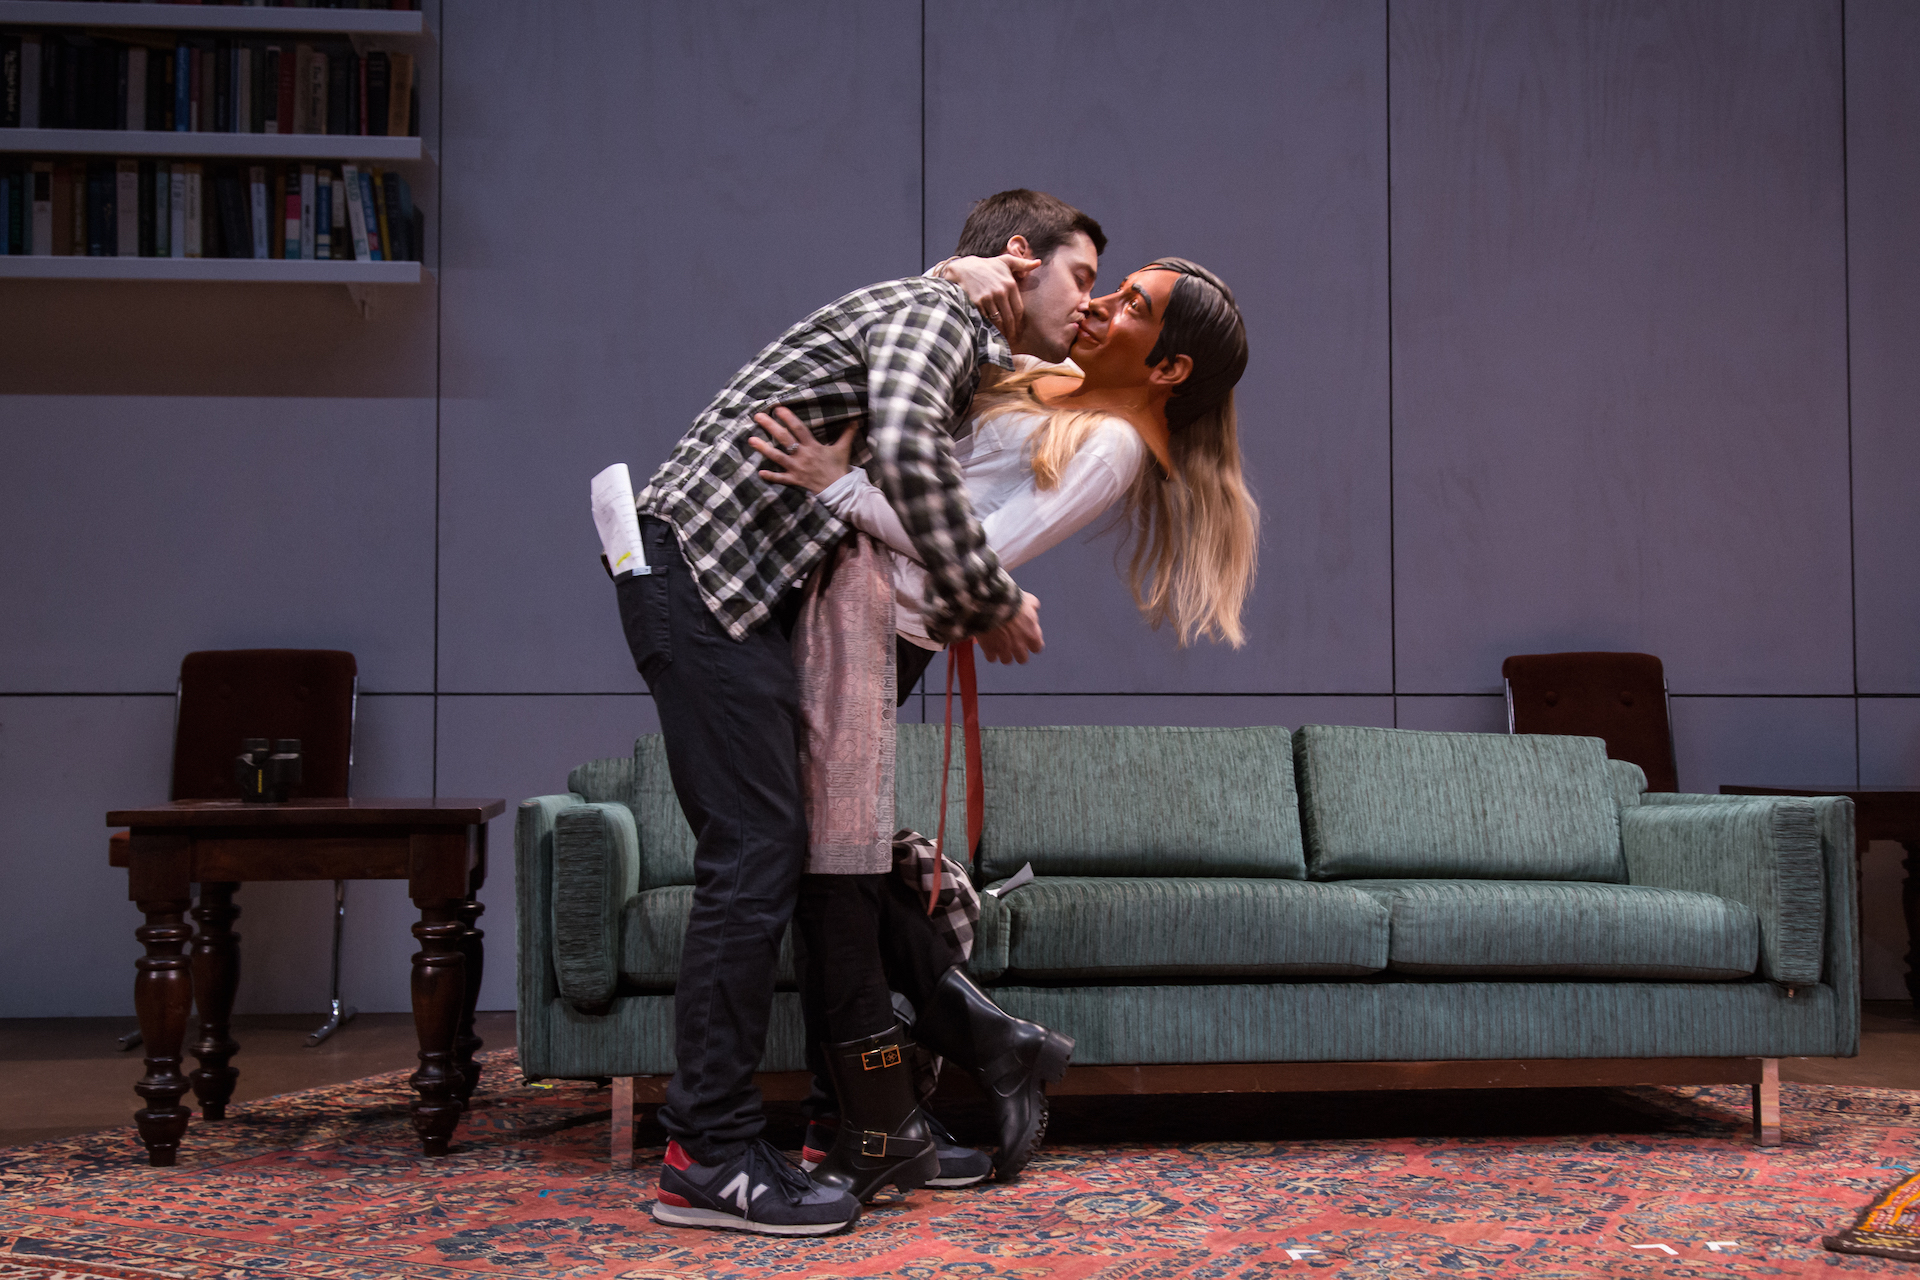 24 Hour Plays Rehearsals Justin Long and Amanda Seyfried